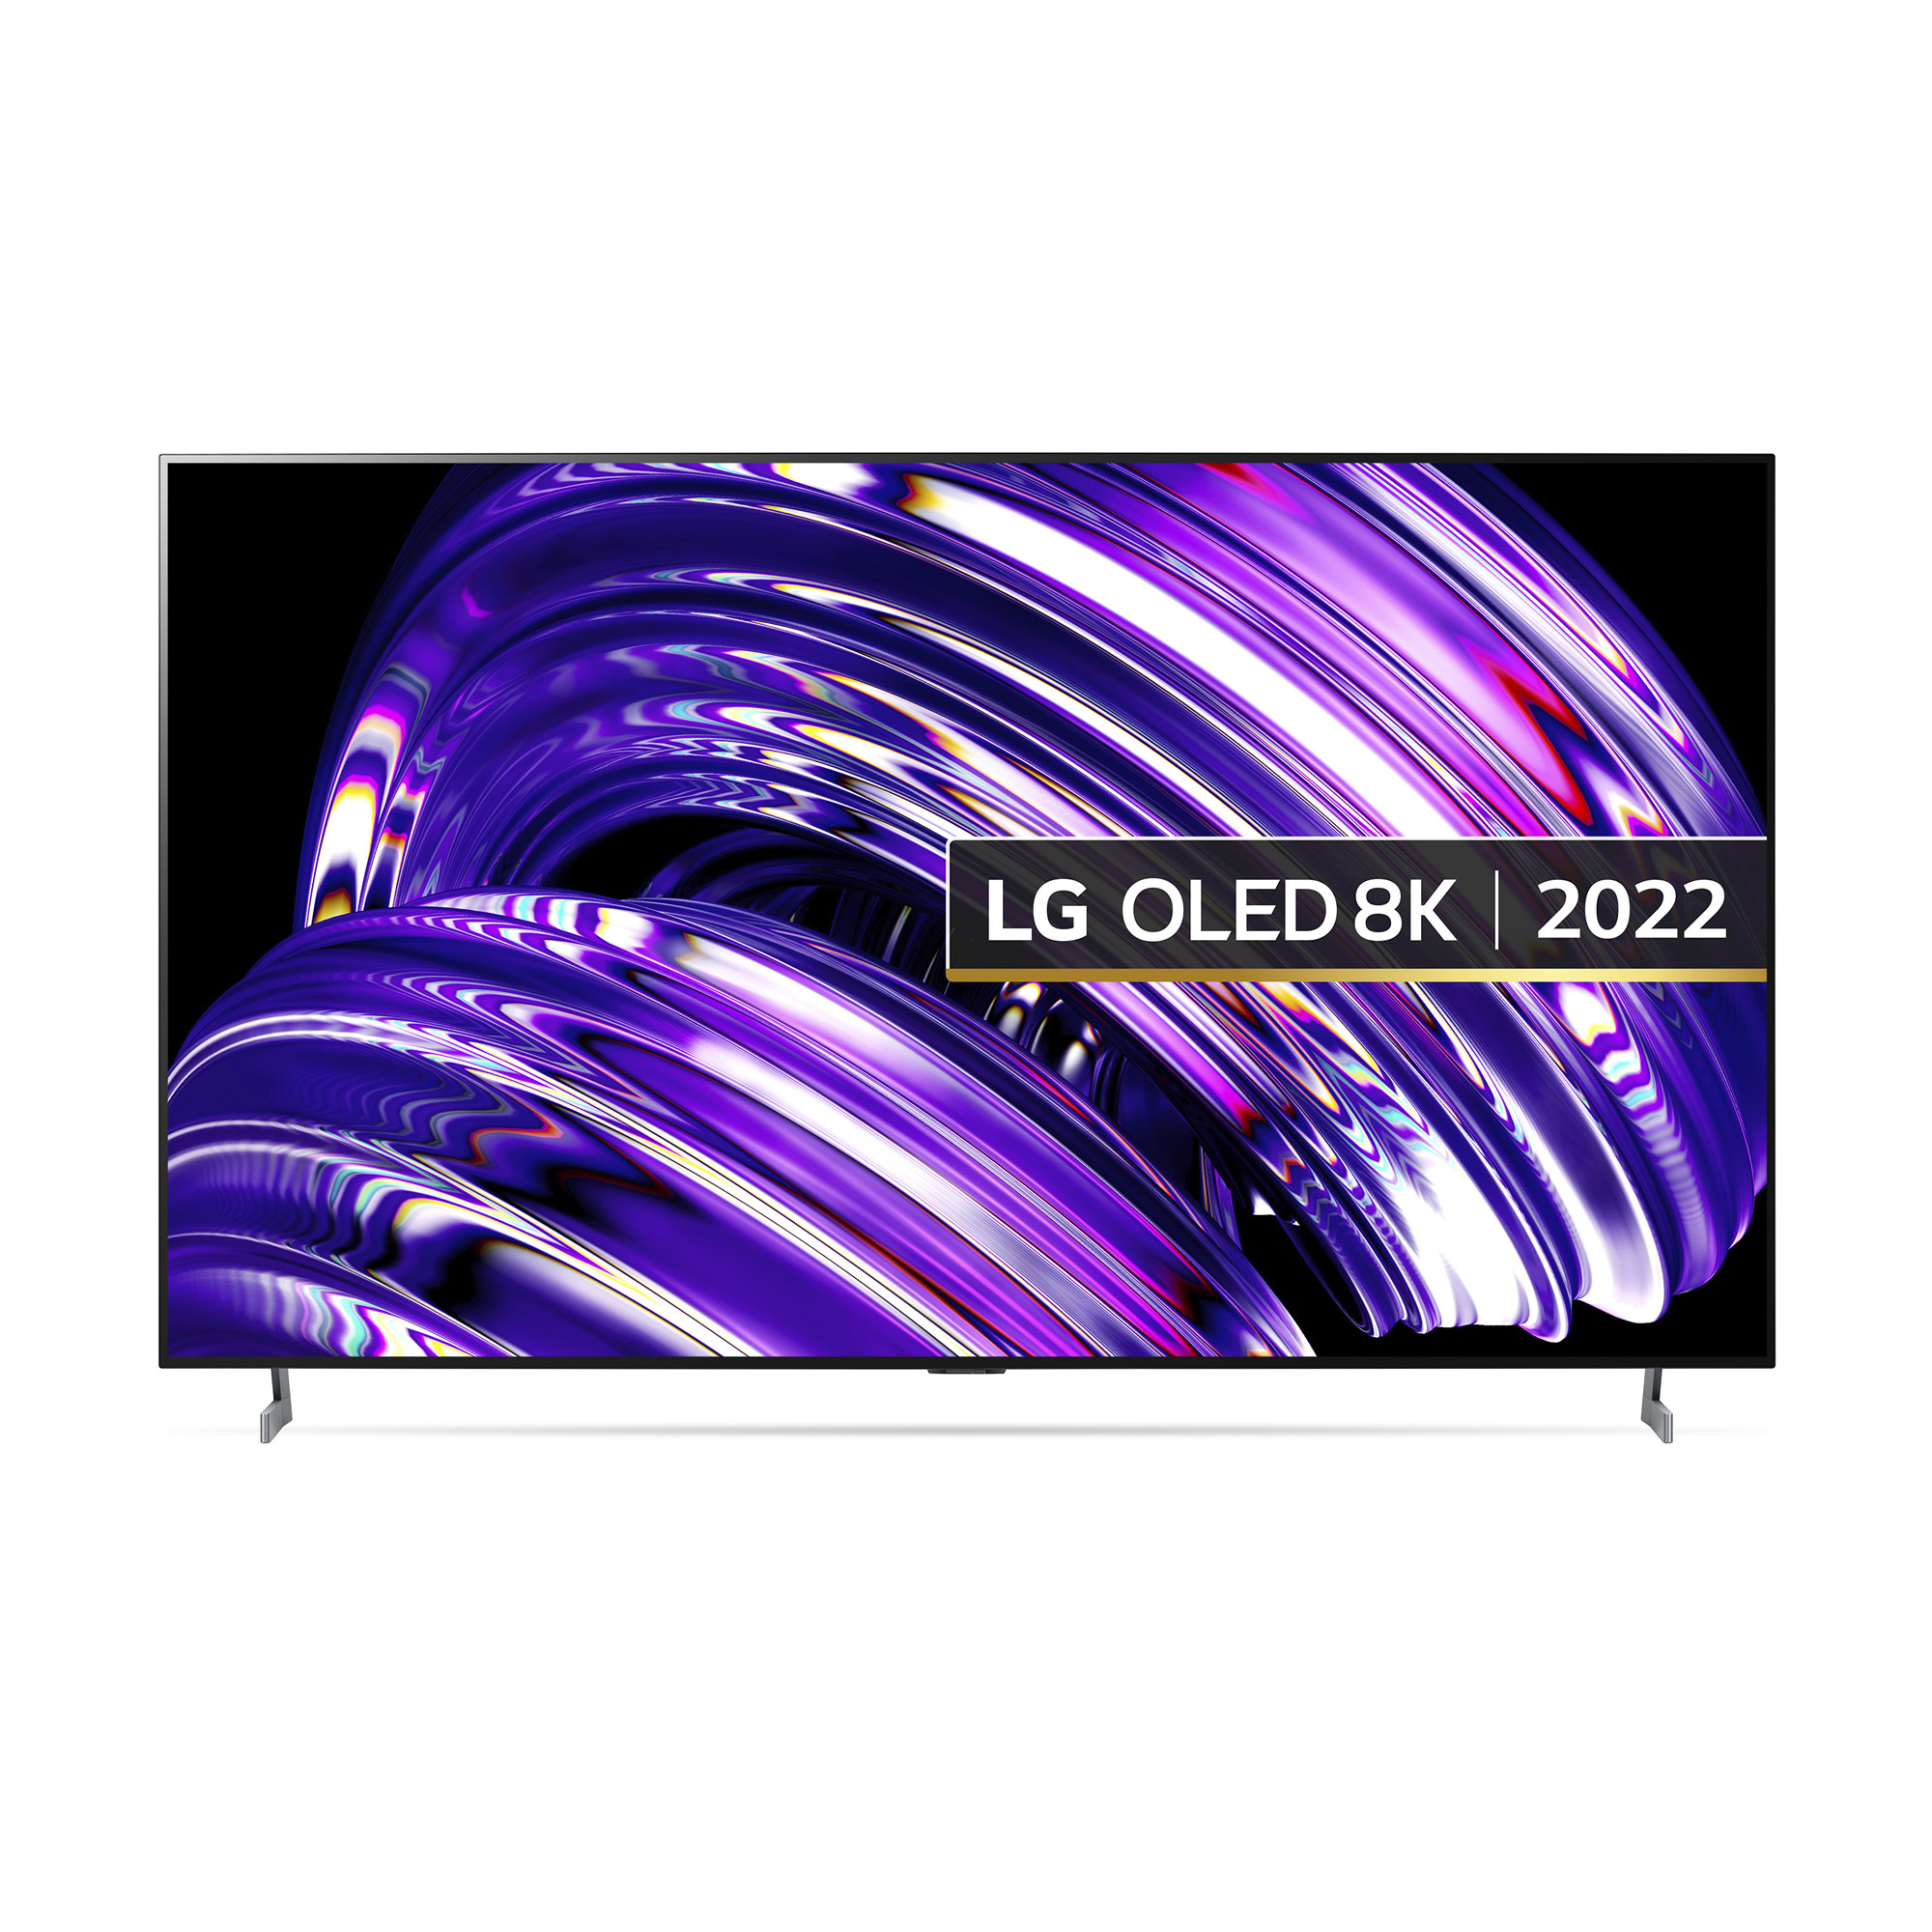 LG 77inch OLED HDR 8K UHD SMART TV WiFi Dolby Atmos